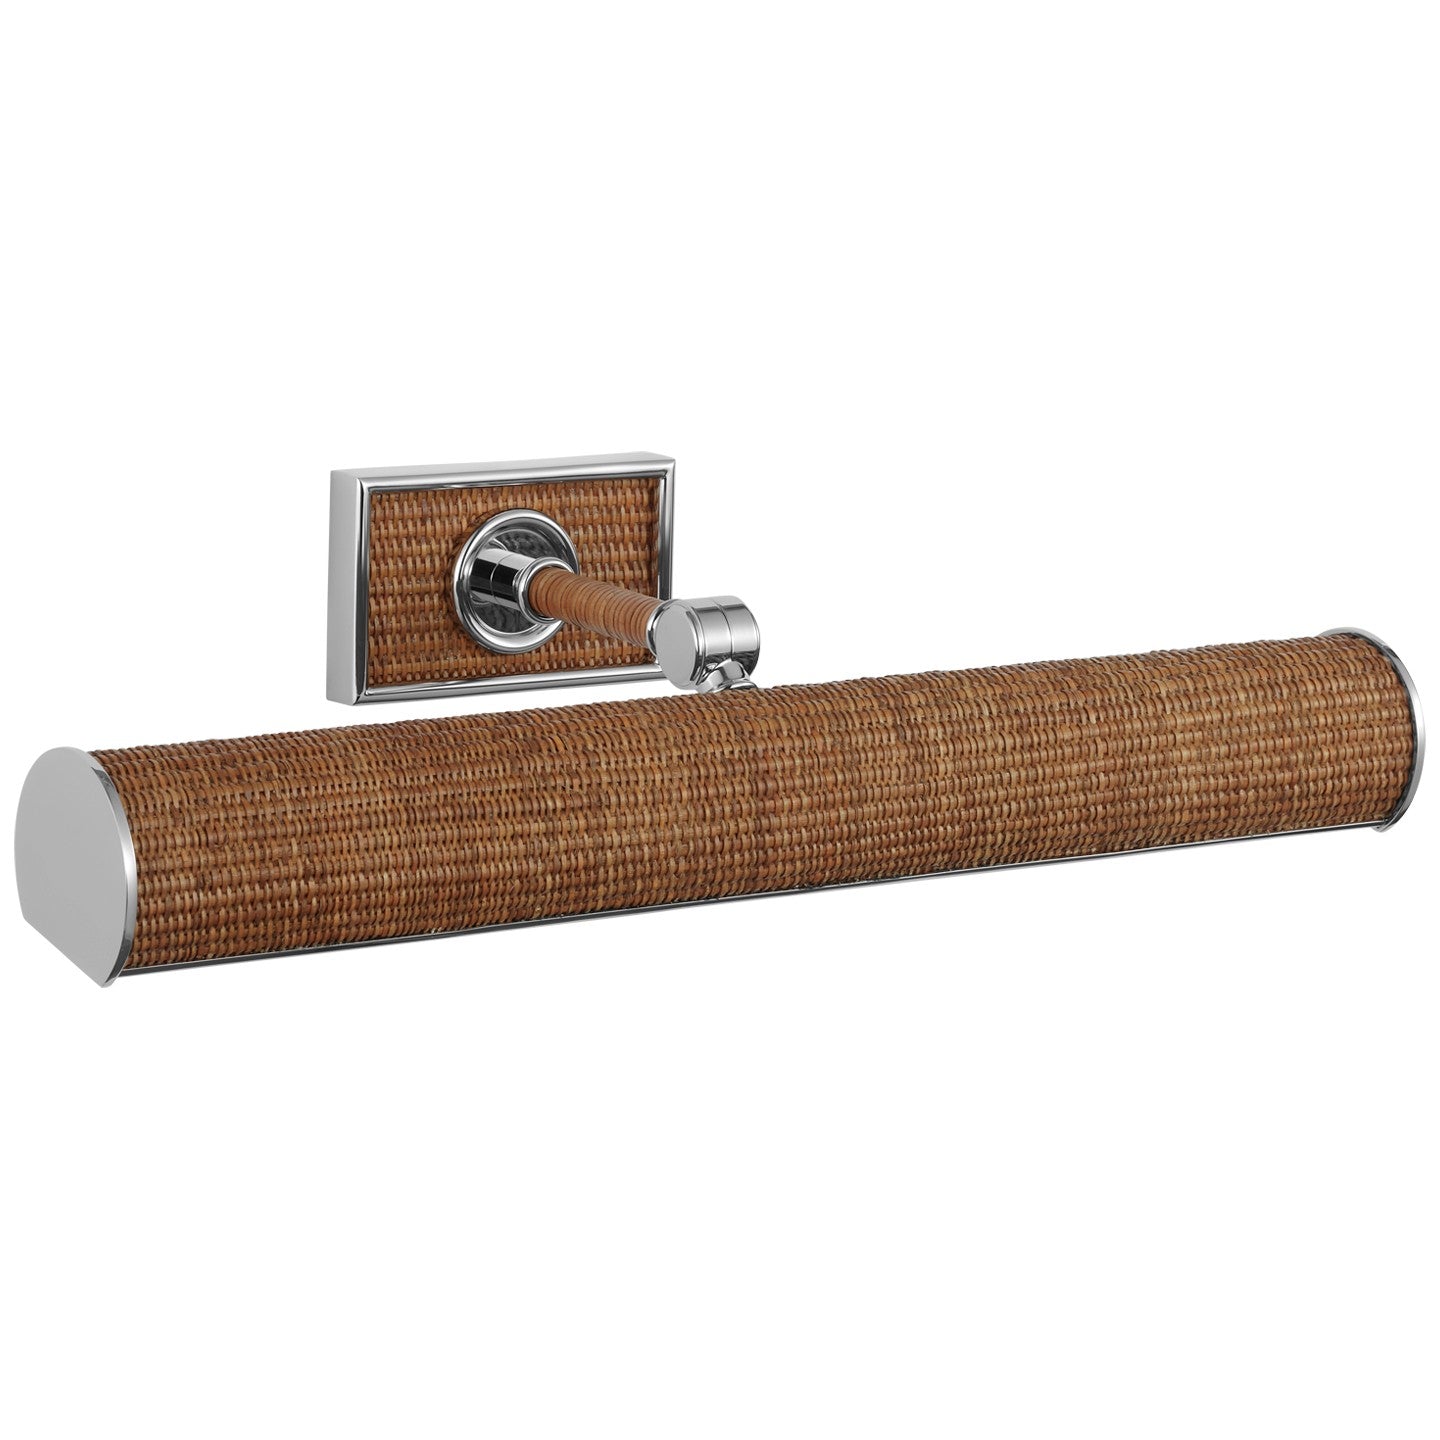 Visual Comfort Signature - CHD 2583PN/NRT - LED Picture Light - Halwell - Polished Nickel and Natural Woven Rattan